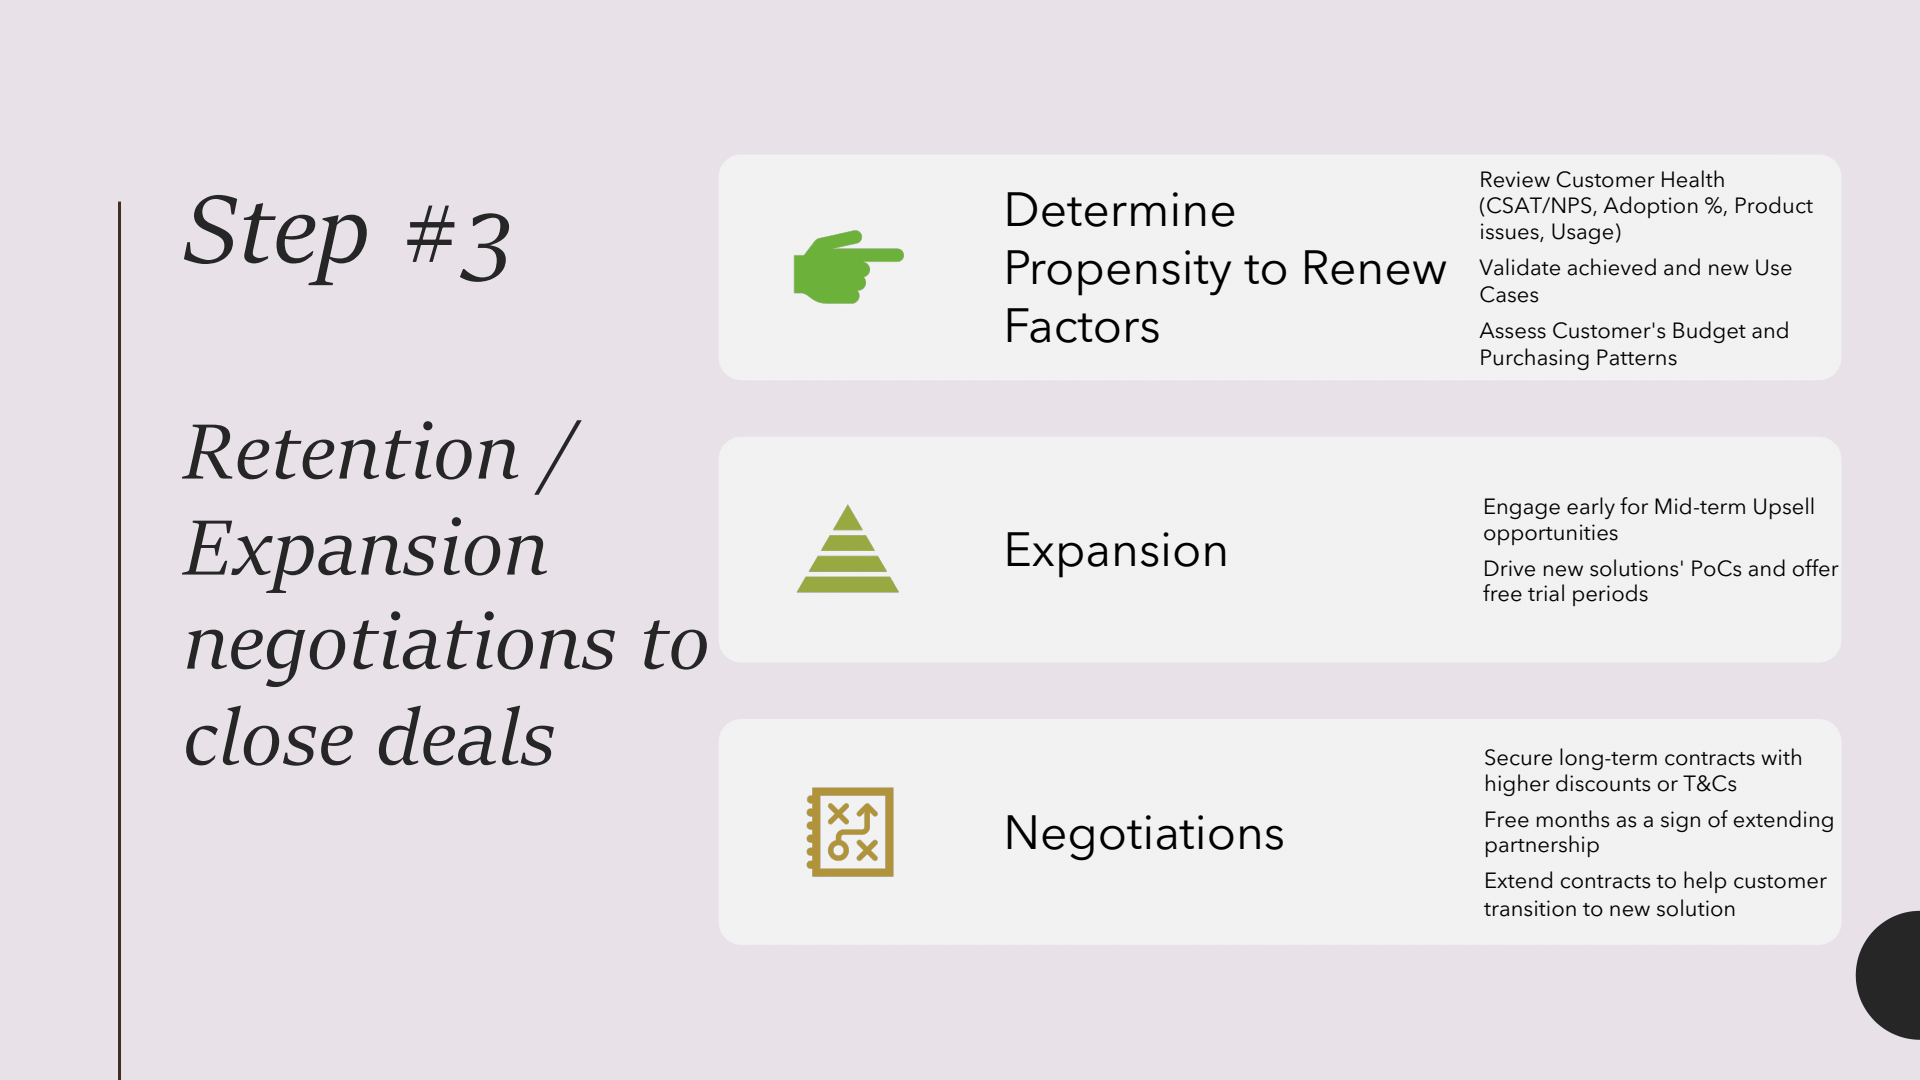 Image shows slide titled "Step #3: Retention/Expansion negotiations to close deals